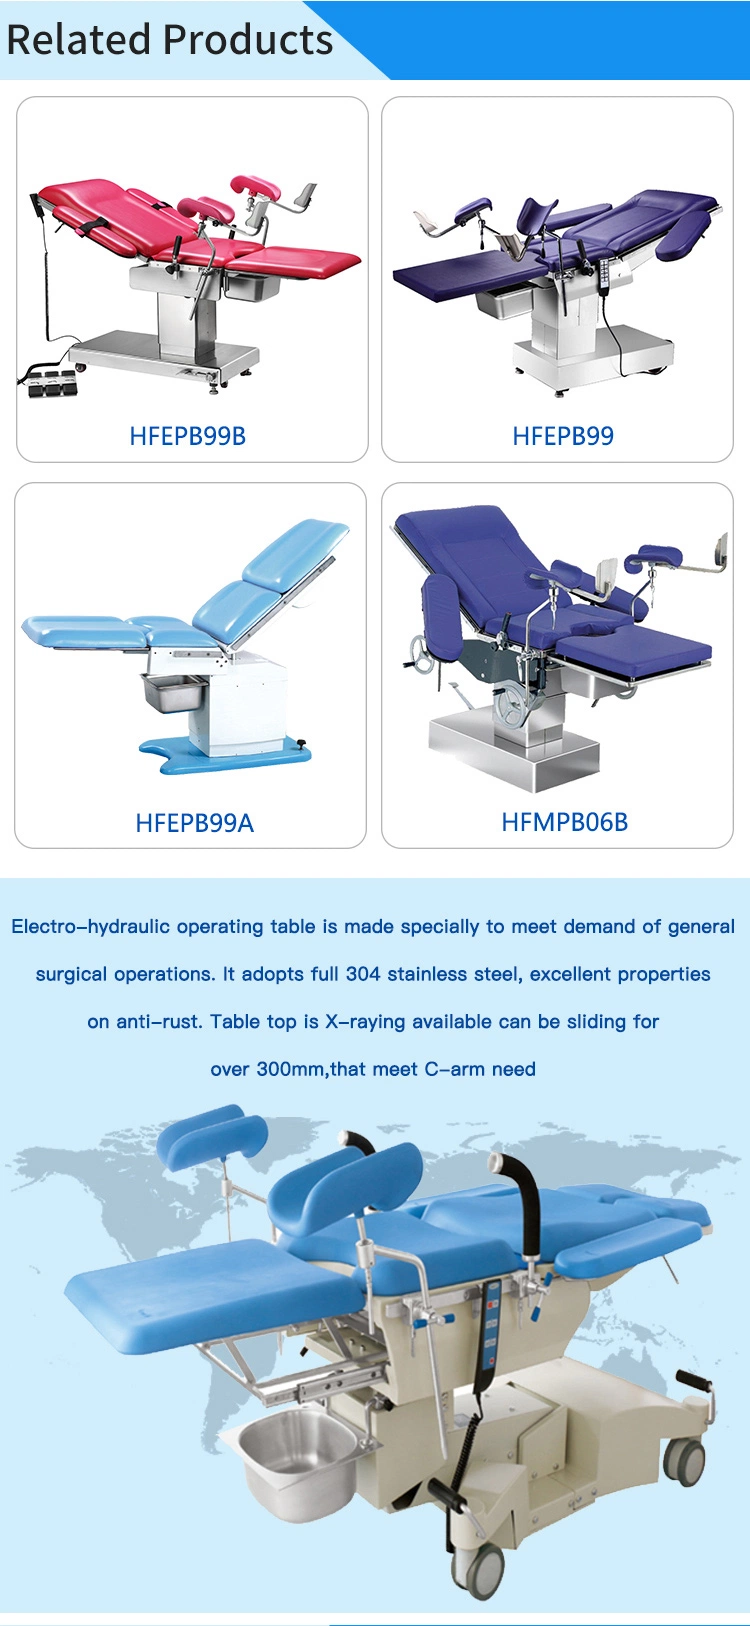 Hot Selling Hospital Electro-Hydraulic Gynecological Operating Table (HFEPB99D)